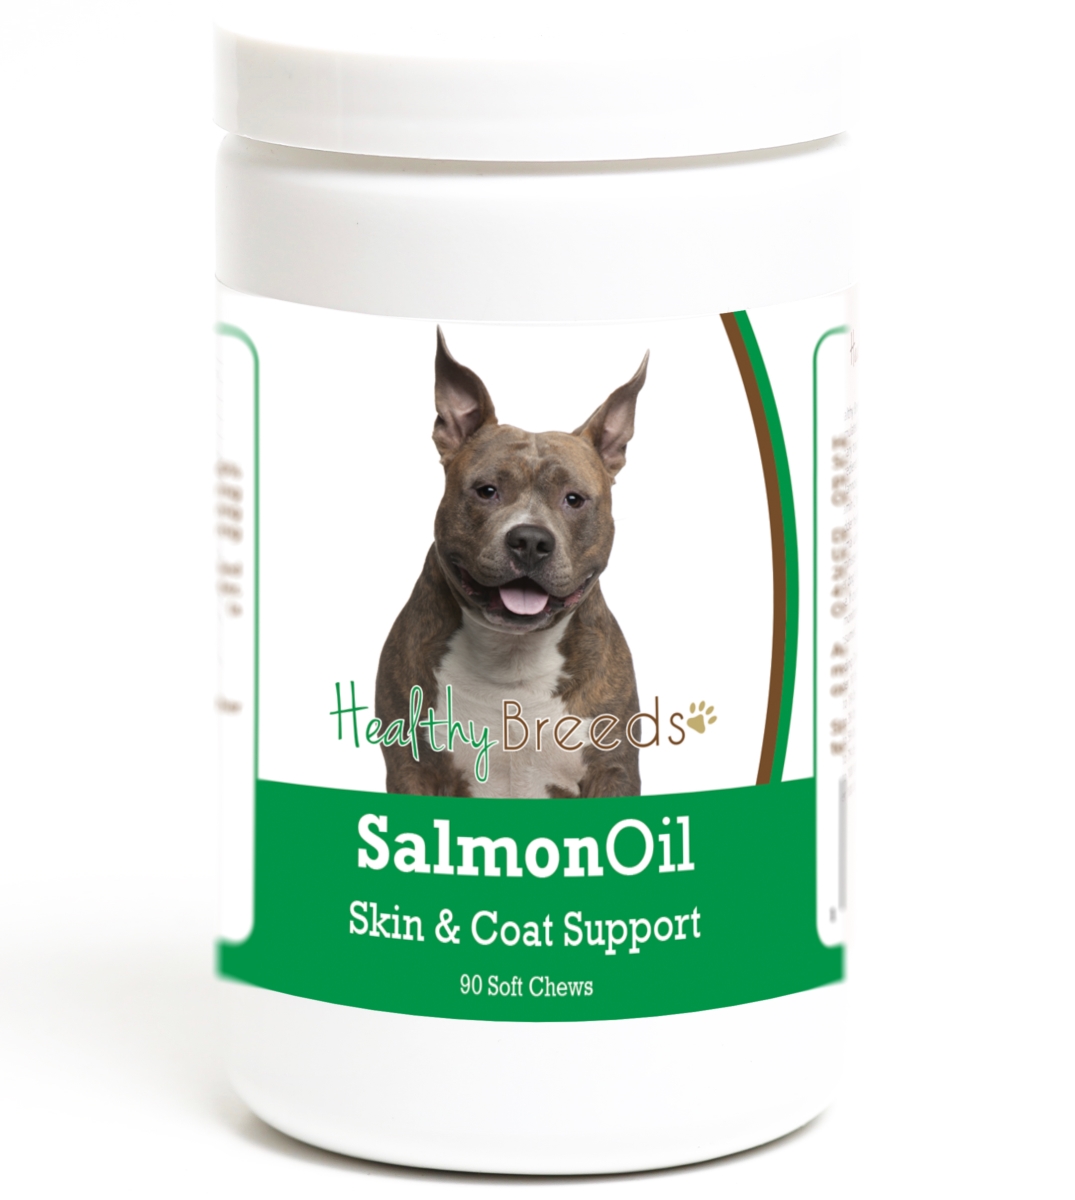 192959016031 American Staffordshire Terrier Salmon Oil Soft Chews - 90 Count